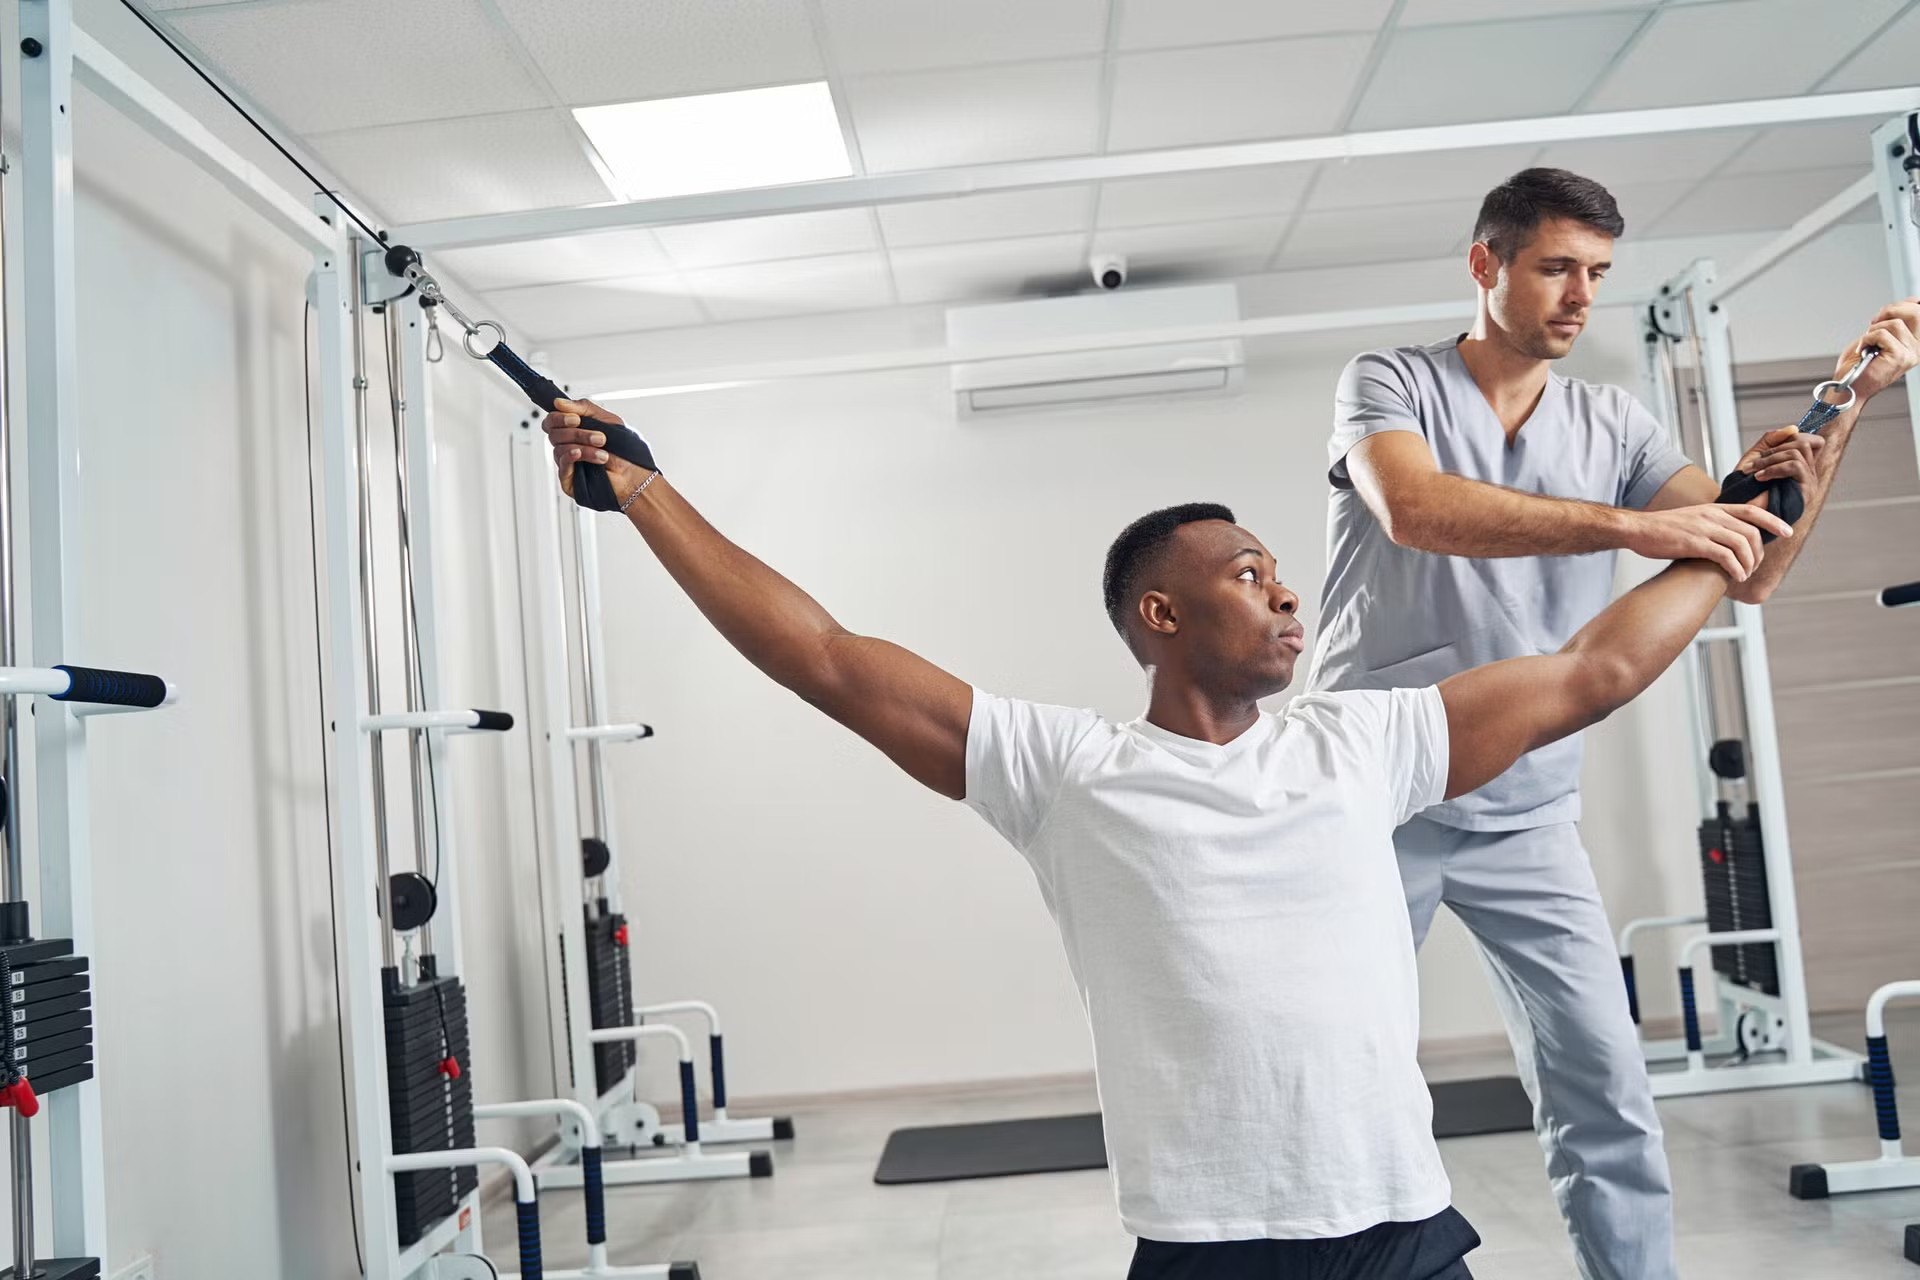 Five Best Physiotherapy Exercises To Maximize Your Movement Potential